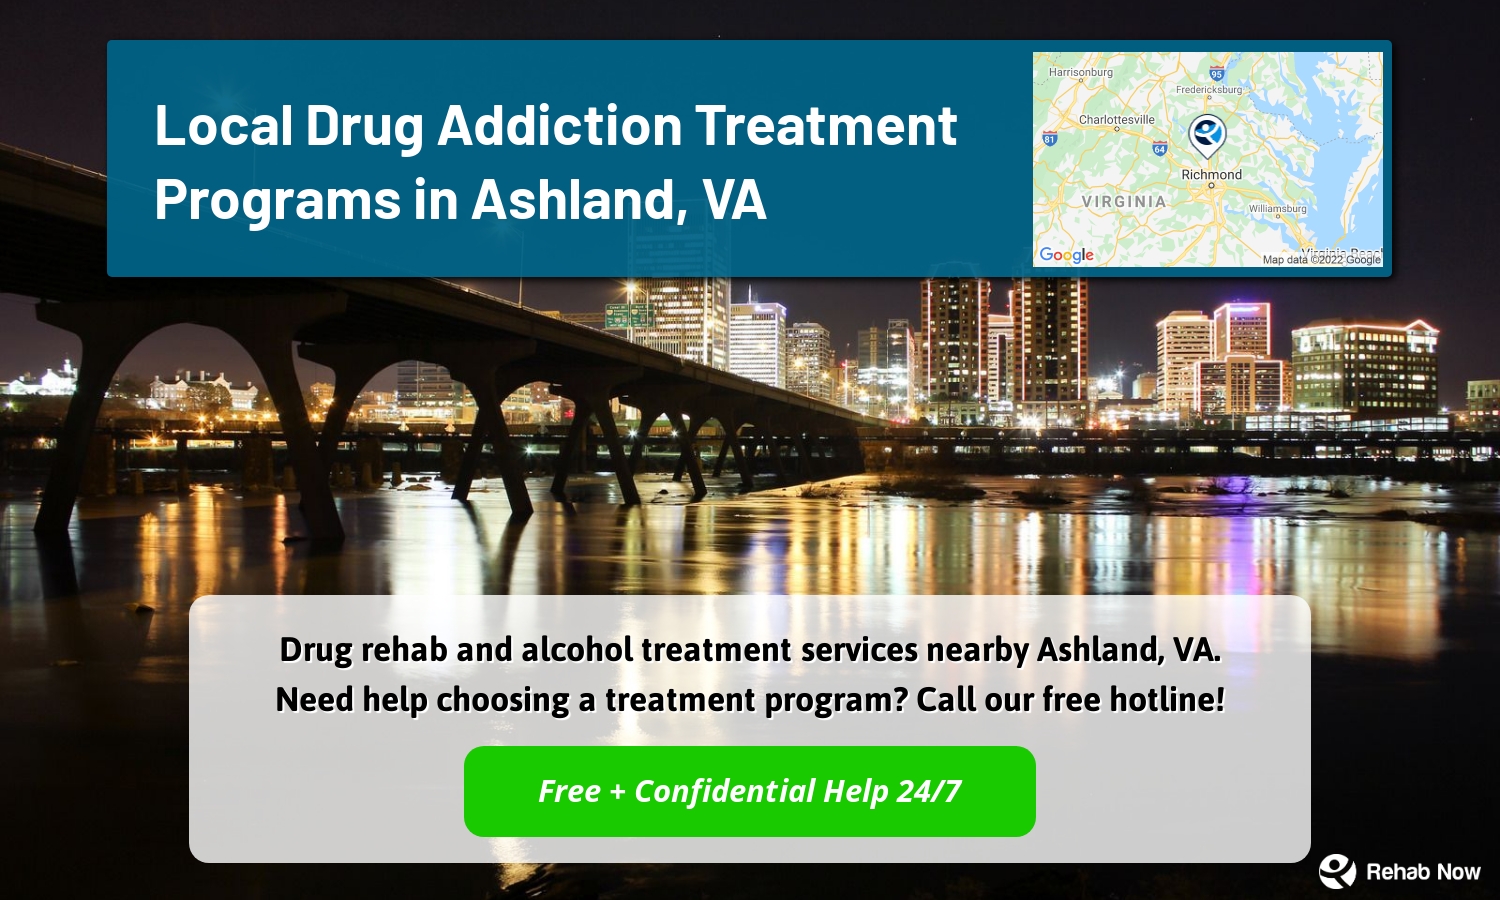 Drug rehab and alcohol treatment services nearby Ashland, VA. Need help choosing a treatment program? Call our free hotline!